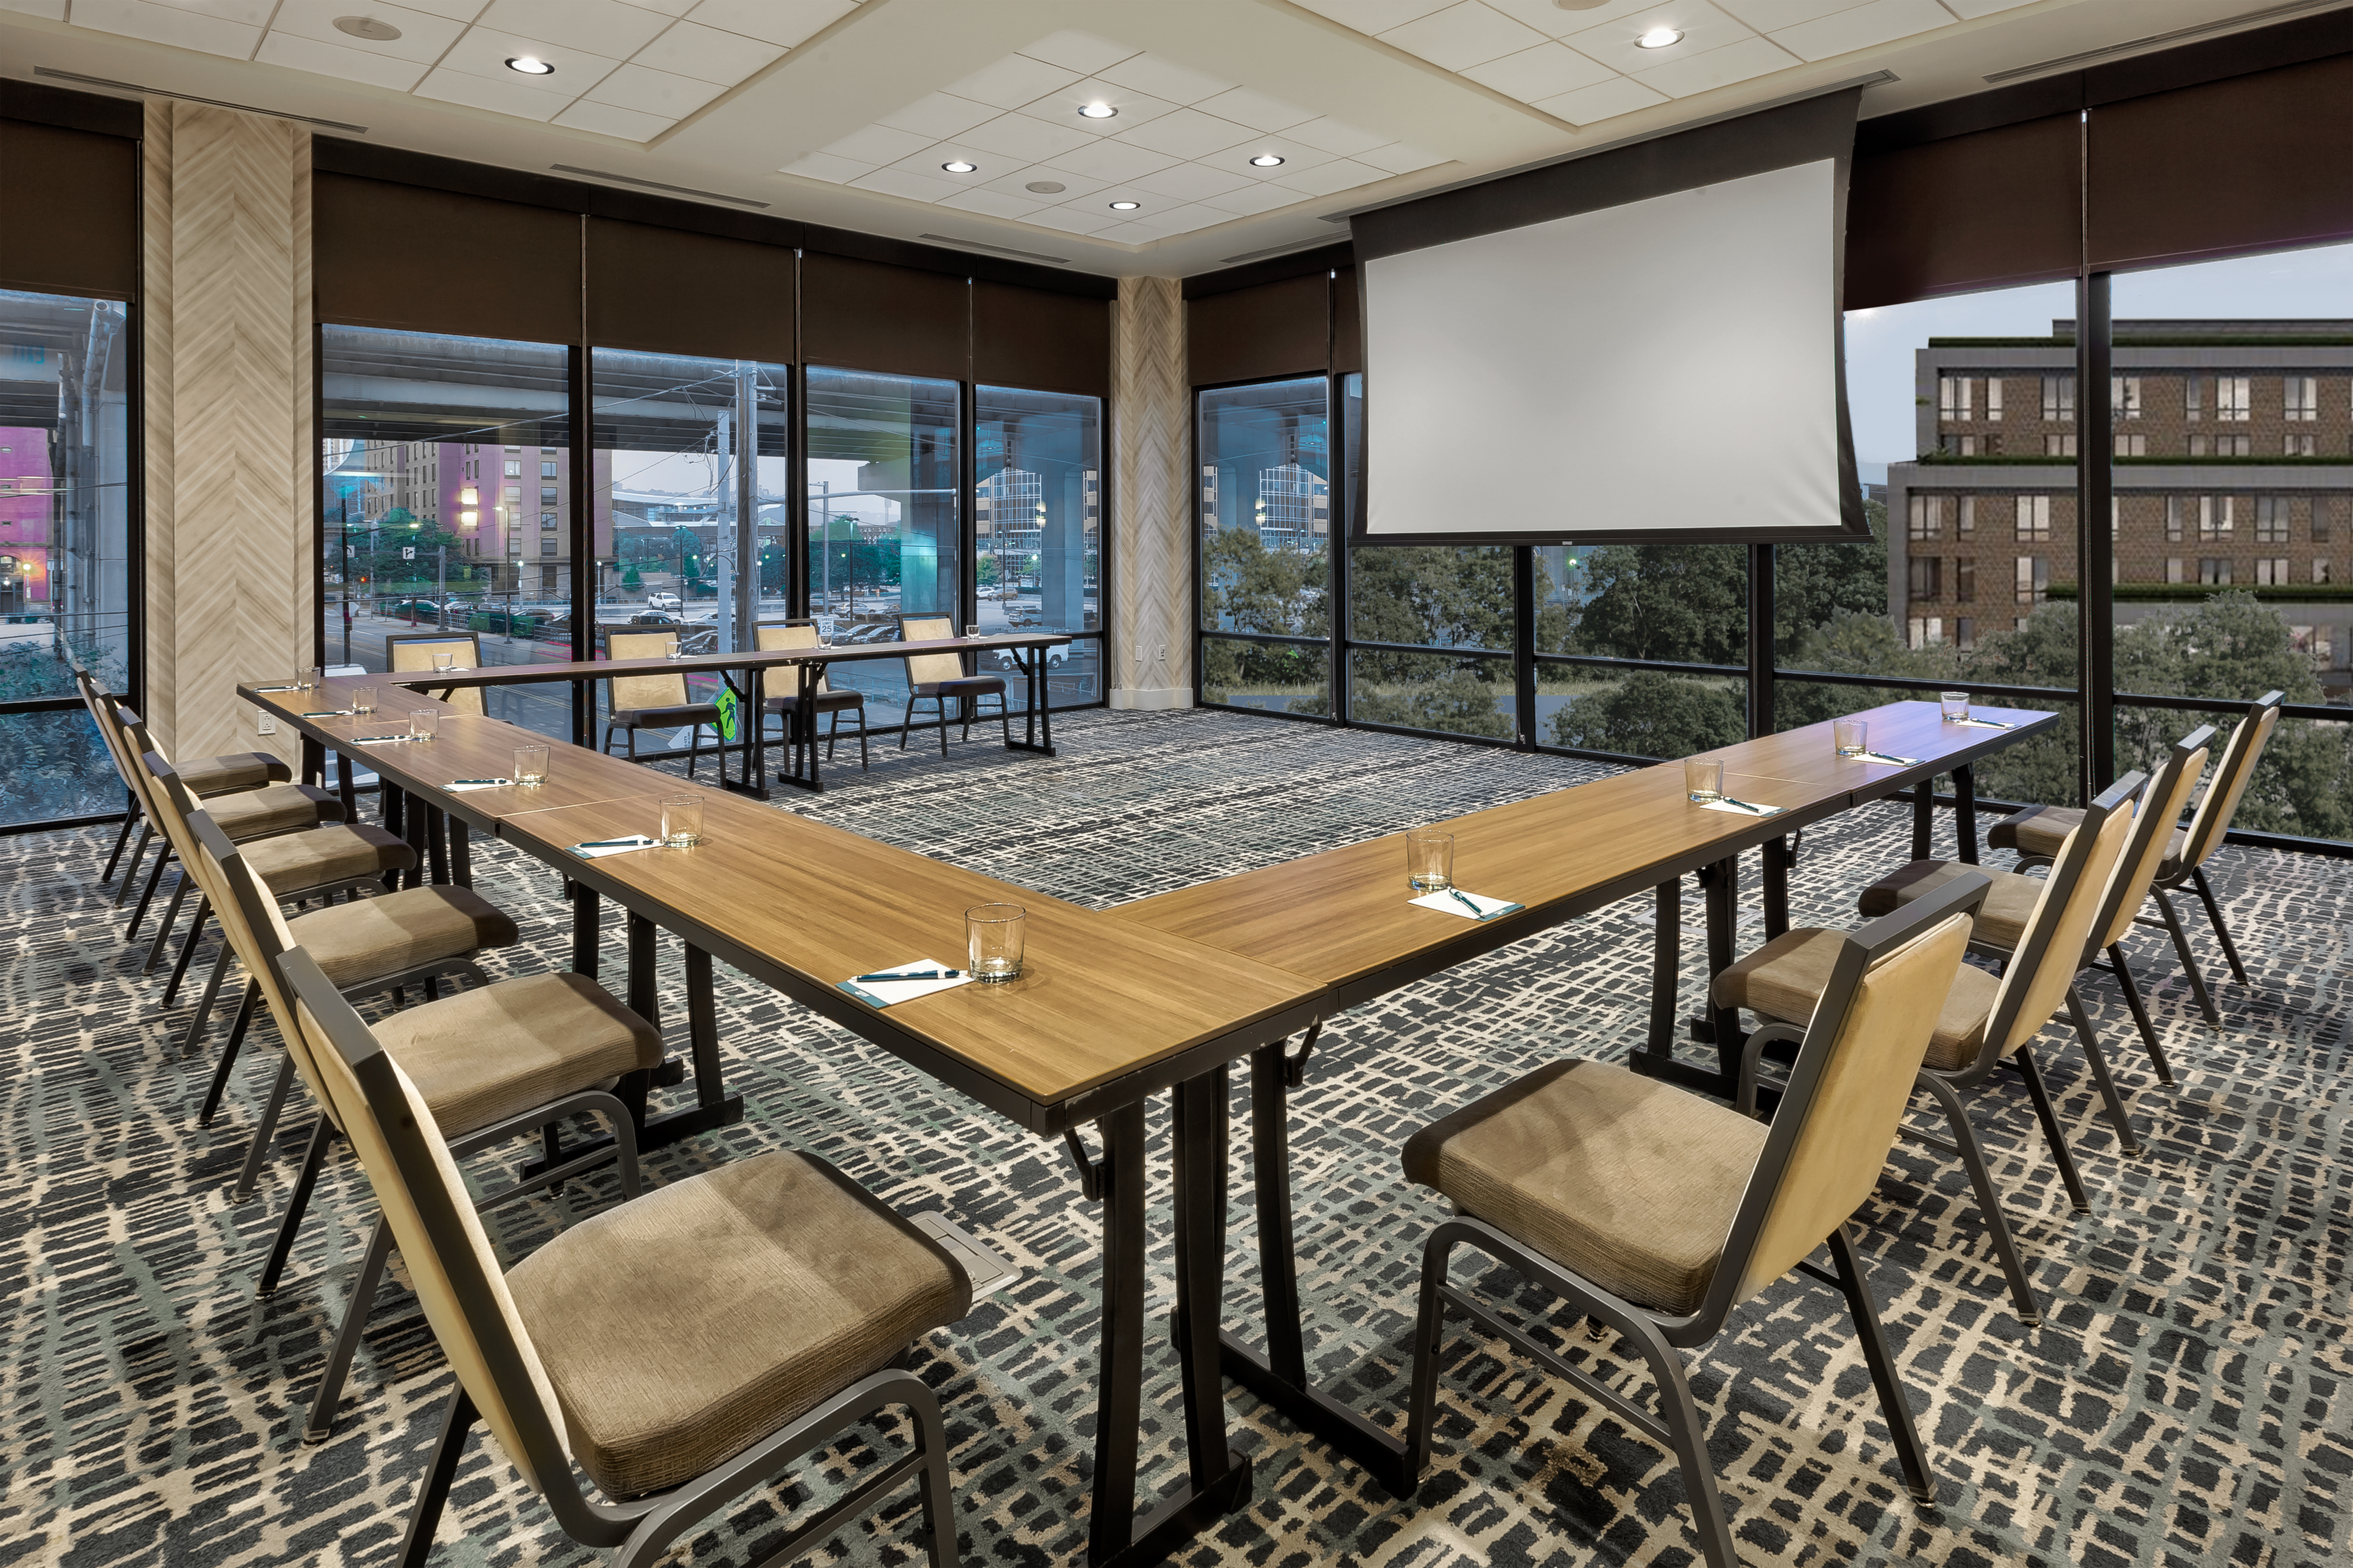 Multiple ways to set up our meeting rooms